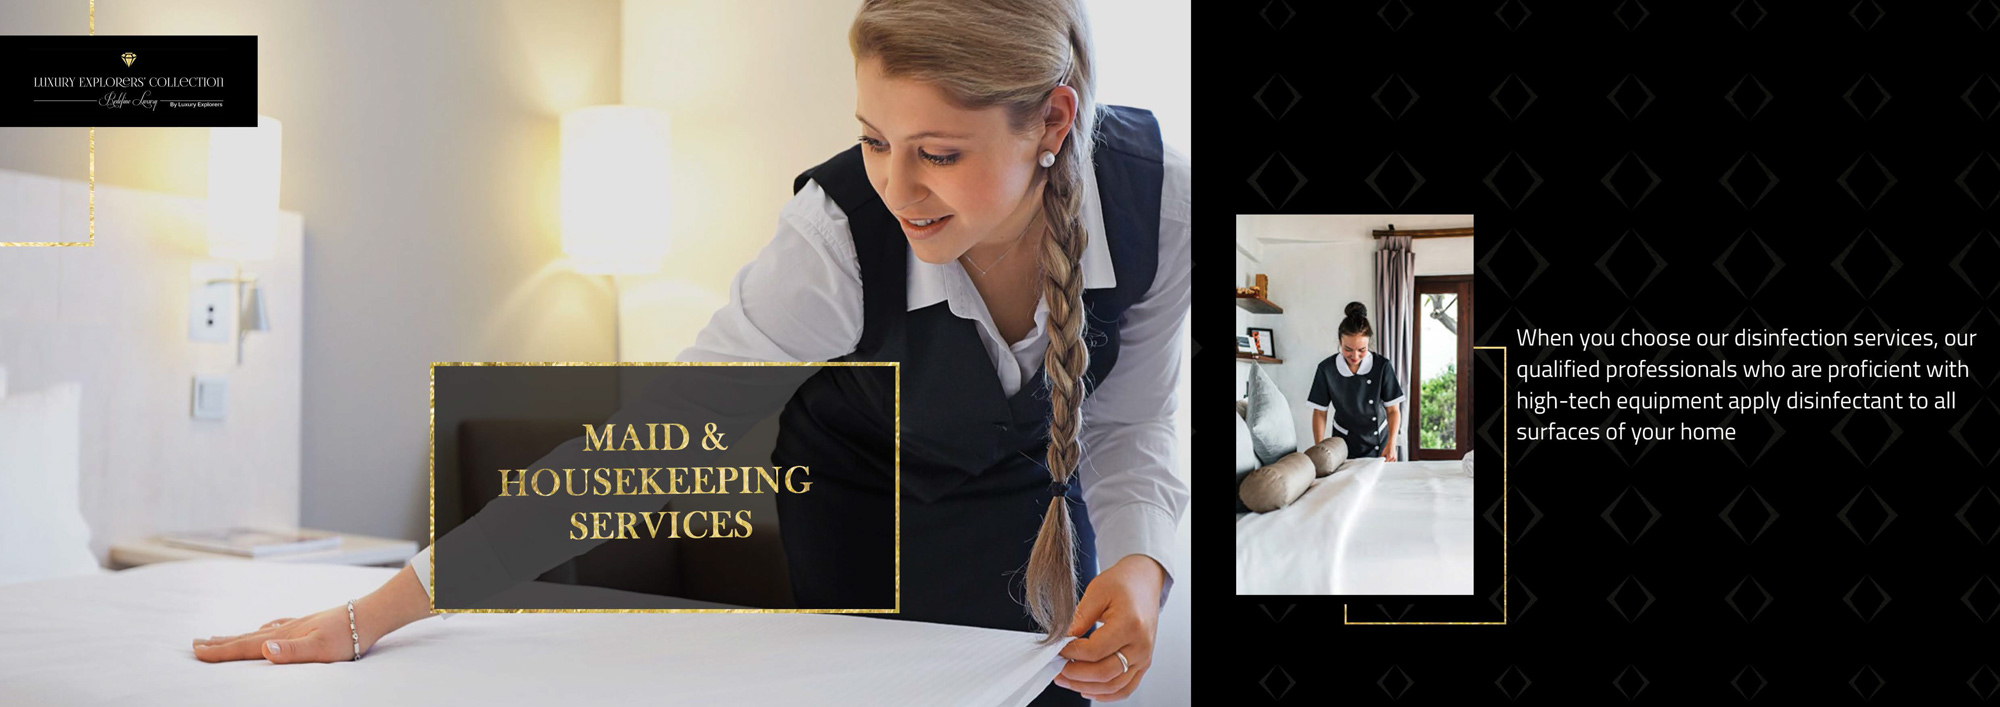 Maid-and-Housekeeping-services